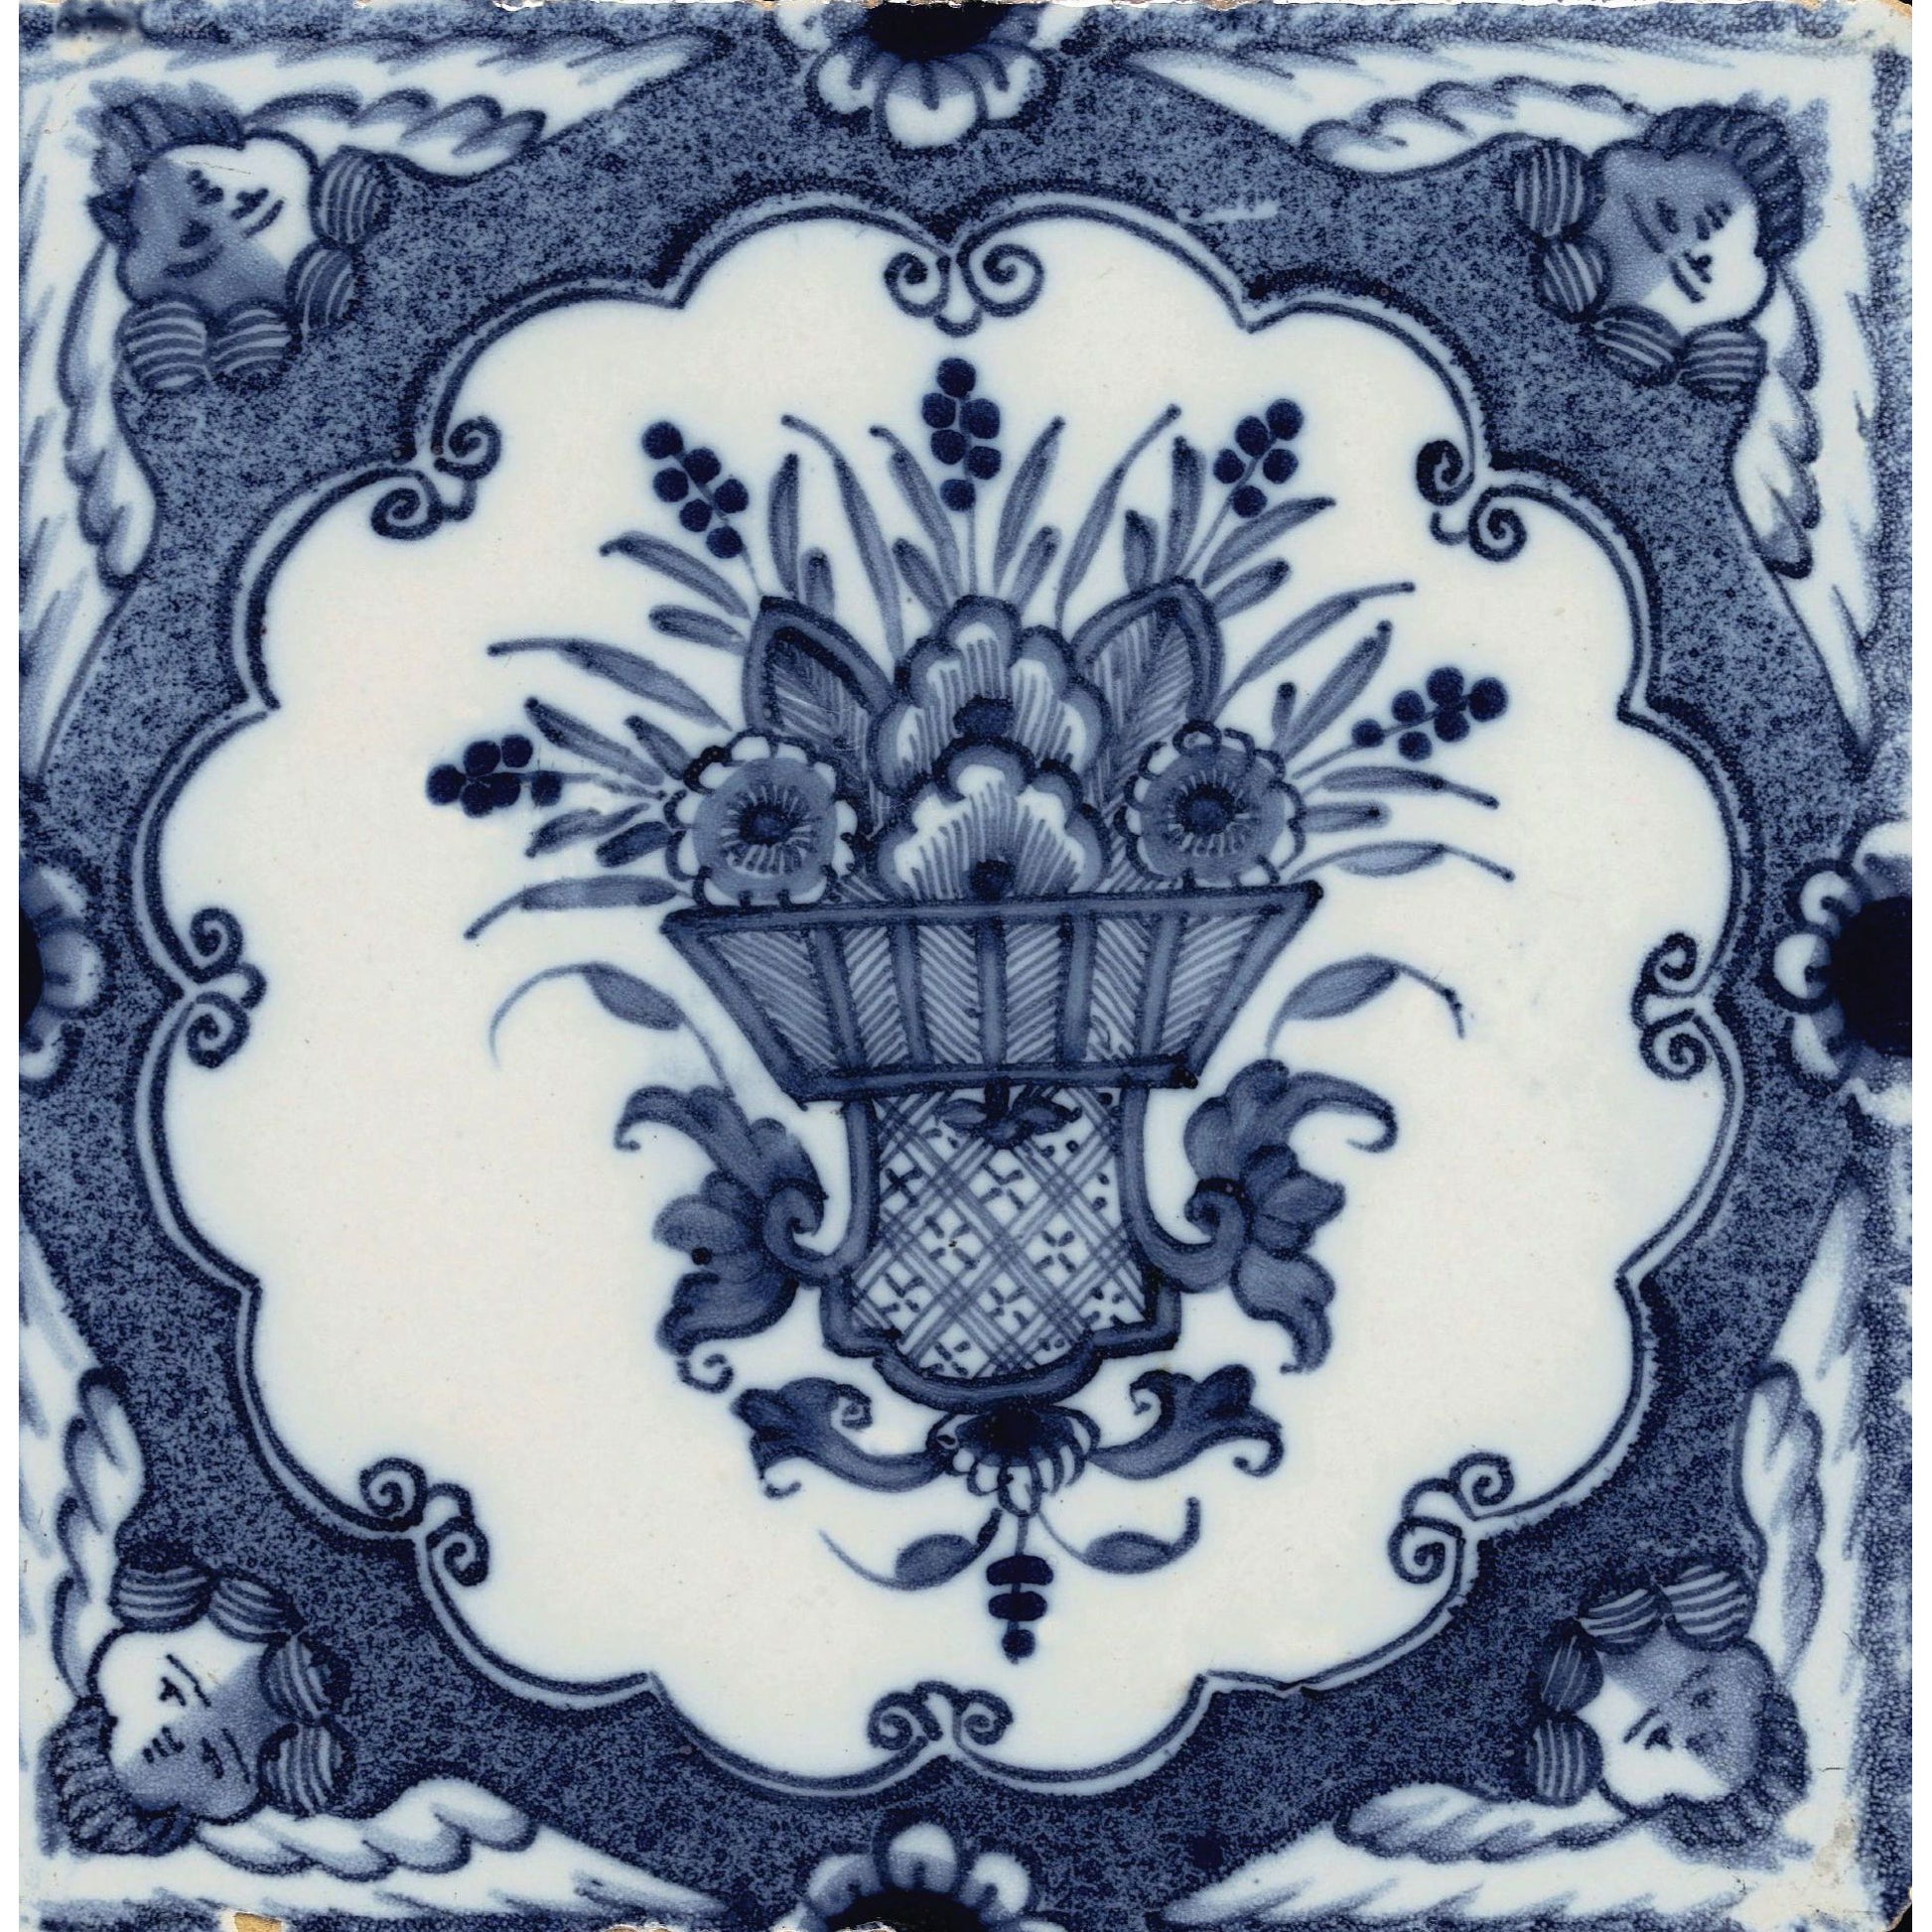 Square greeting card - blue and white tile with central design of flowers in a container, with a scalloped edge border and cherub's heads decorating each corner. From the collection of The Fitzwilliam Museum, brought to you by CuratingCambridge.com